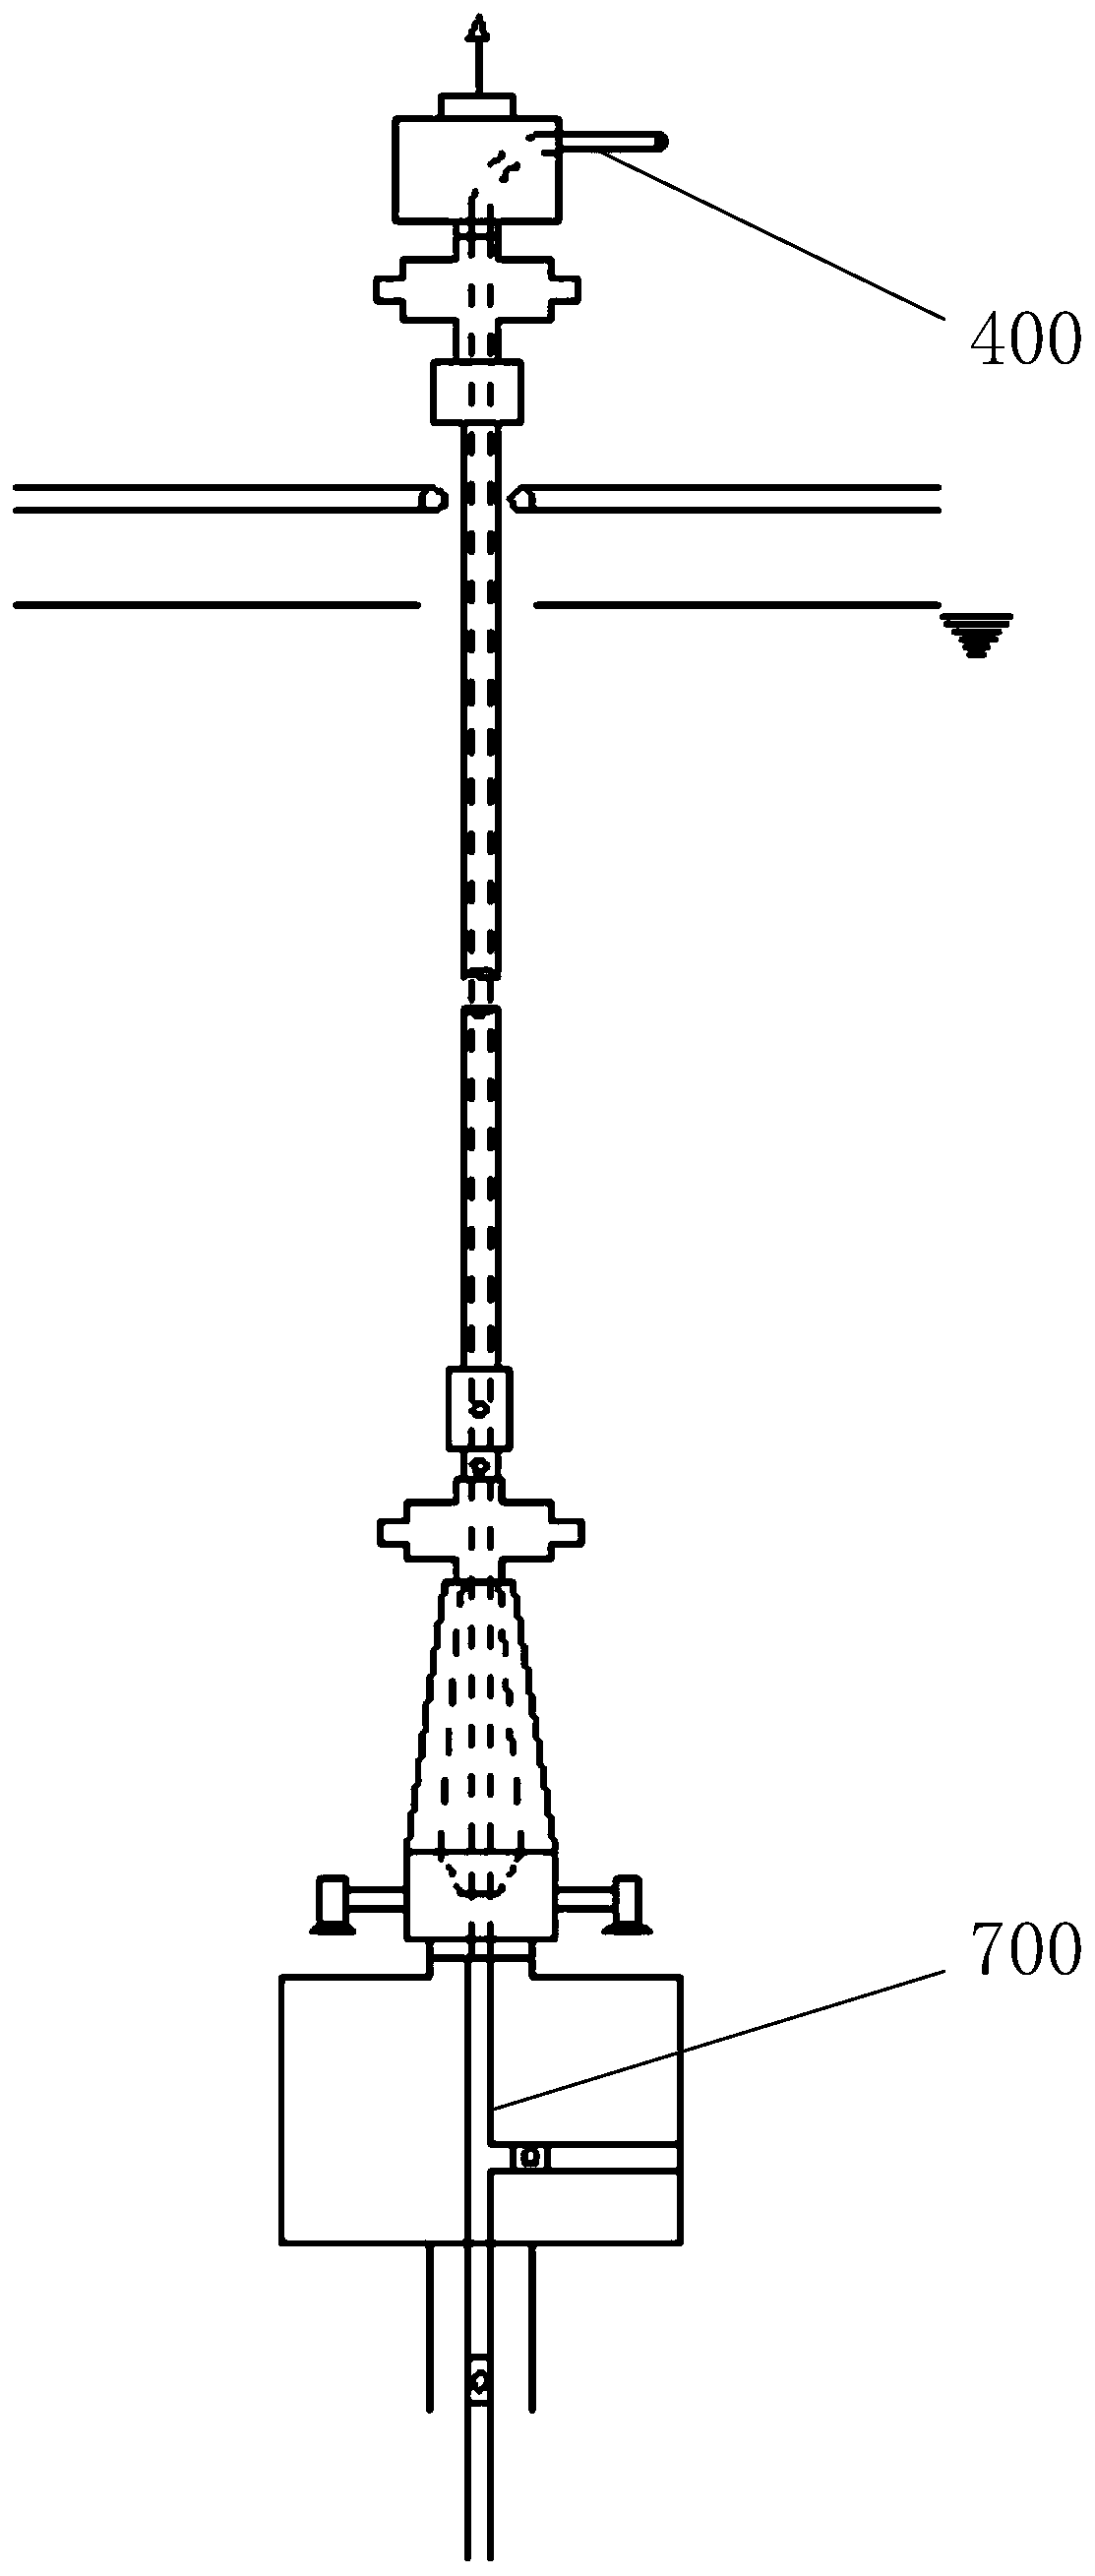 A light workover device and method for deepwater oil and gas fields